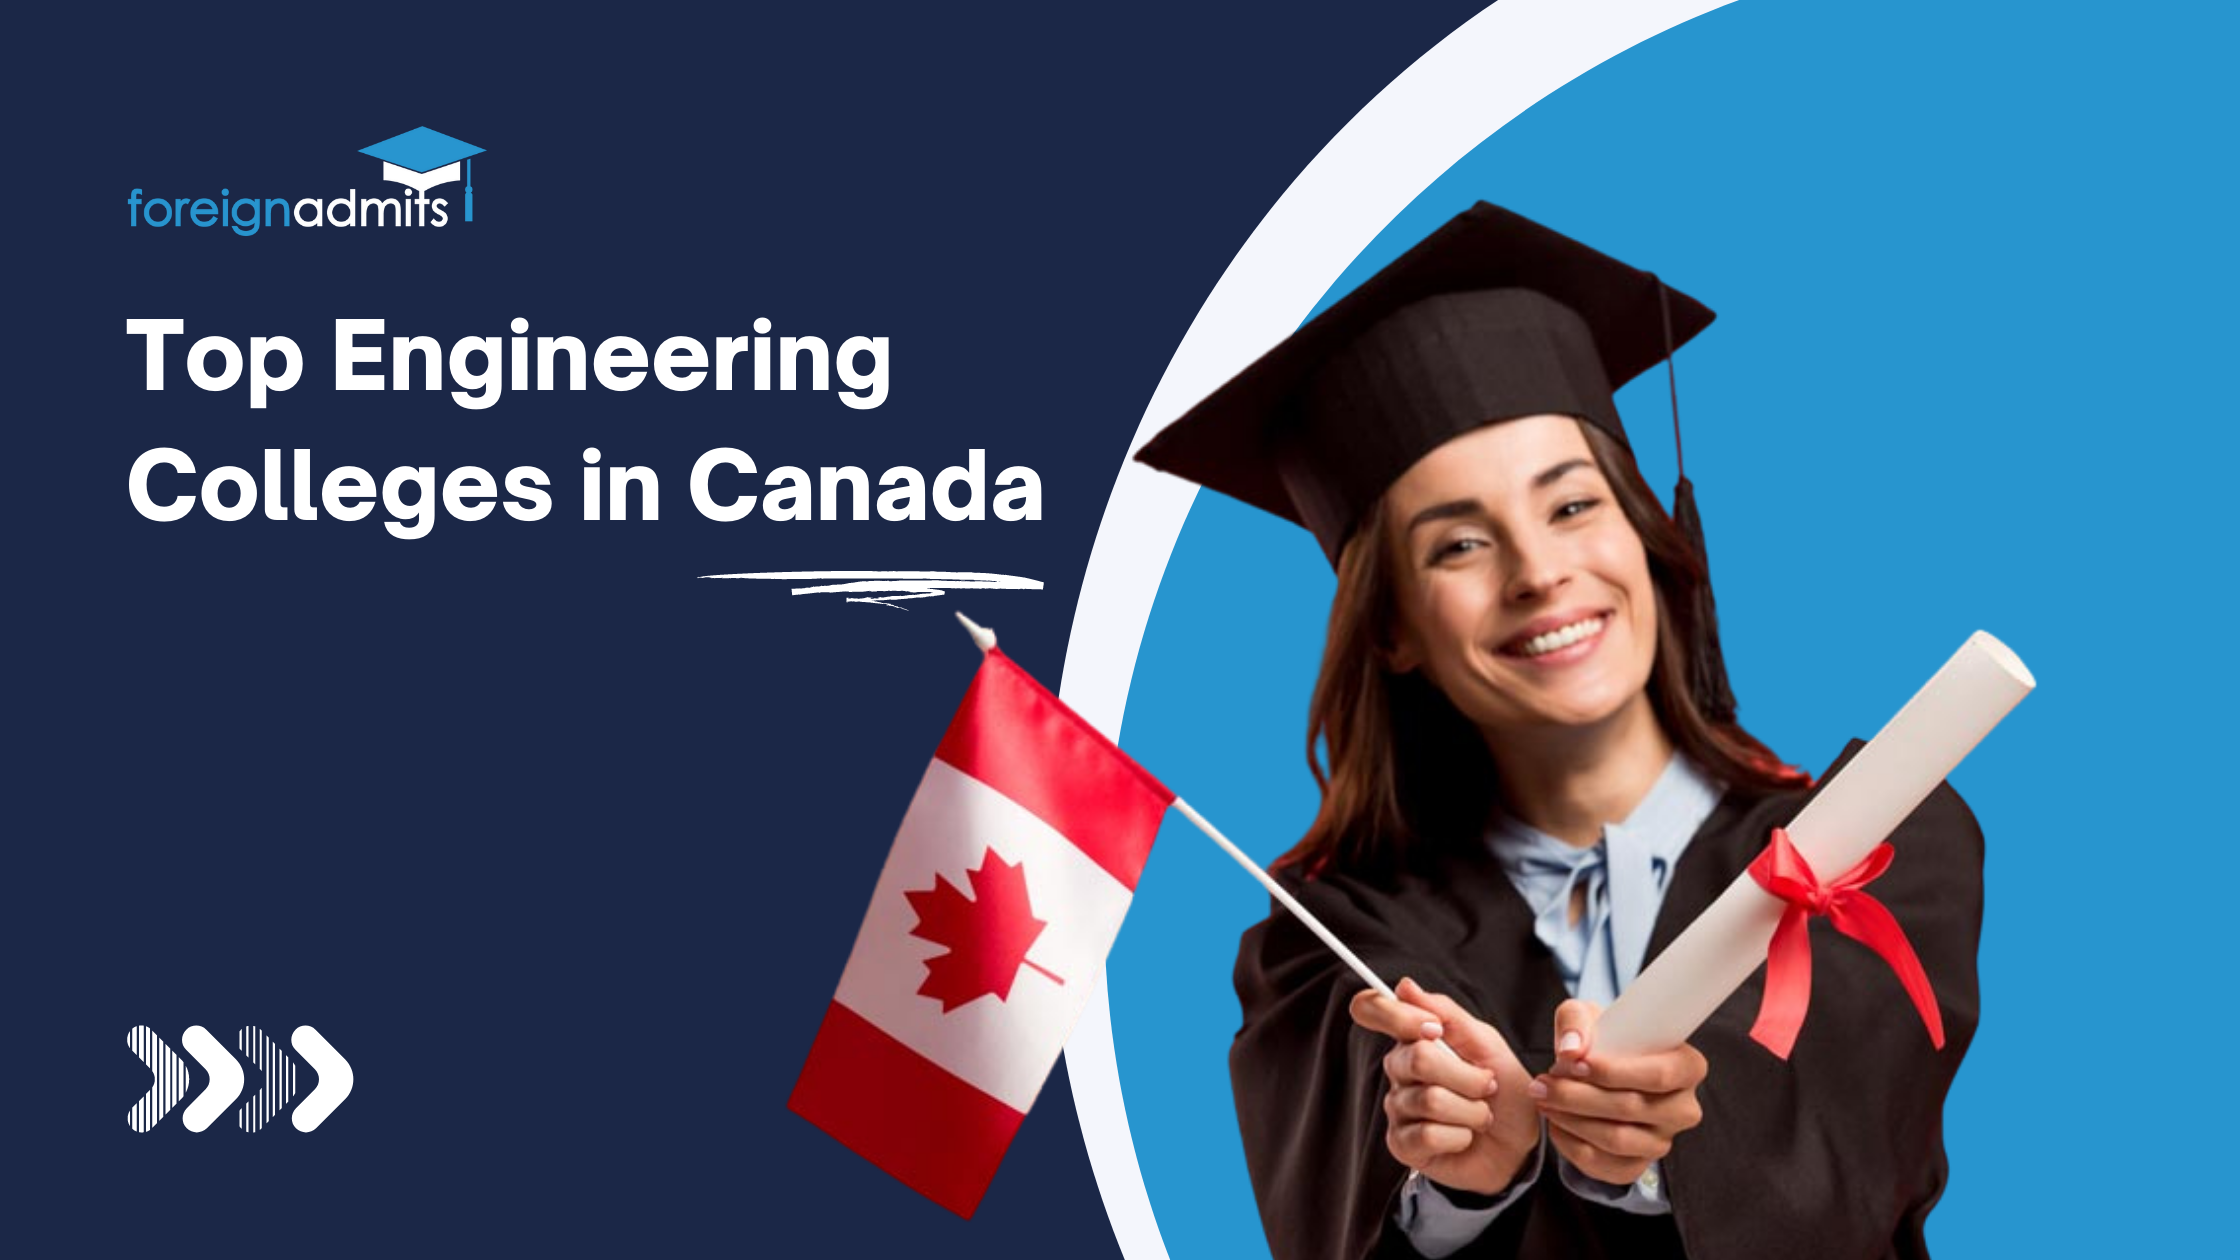 Top engineering colleges in Canada